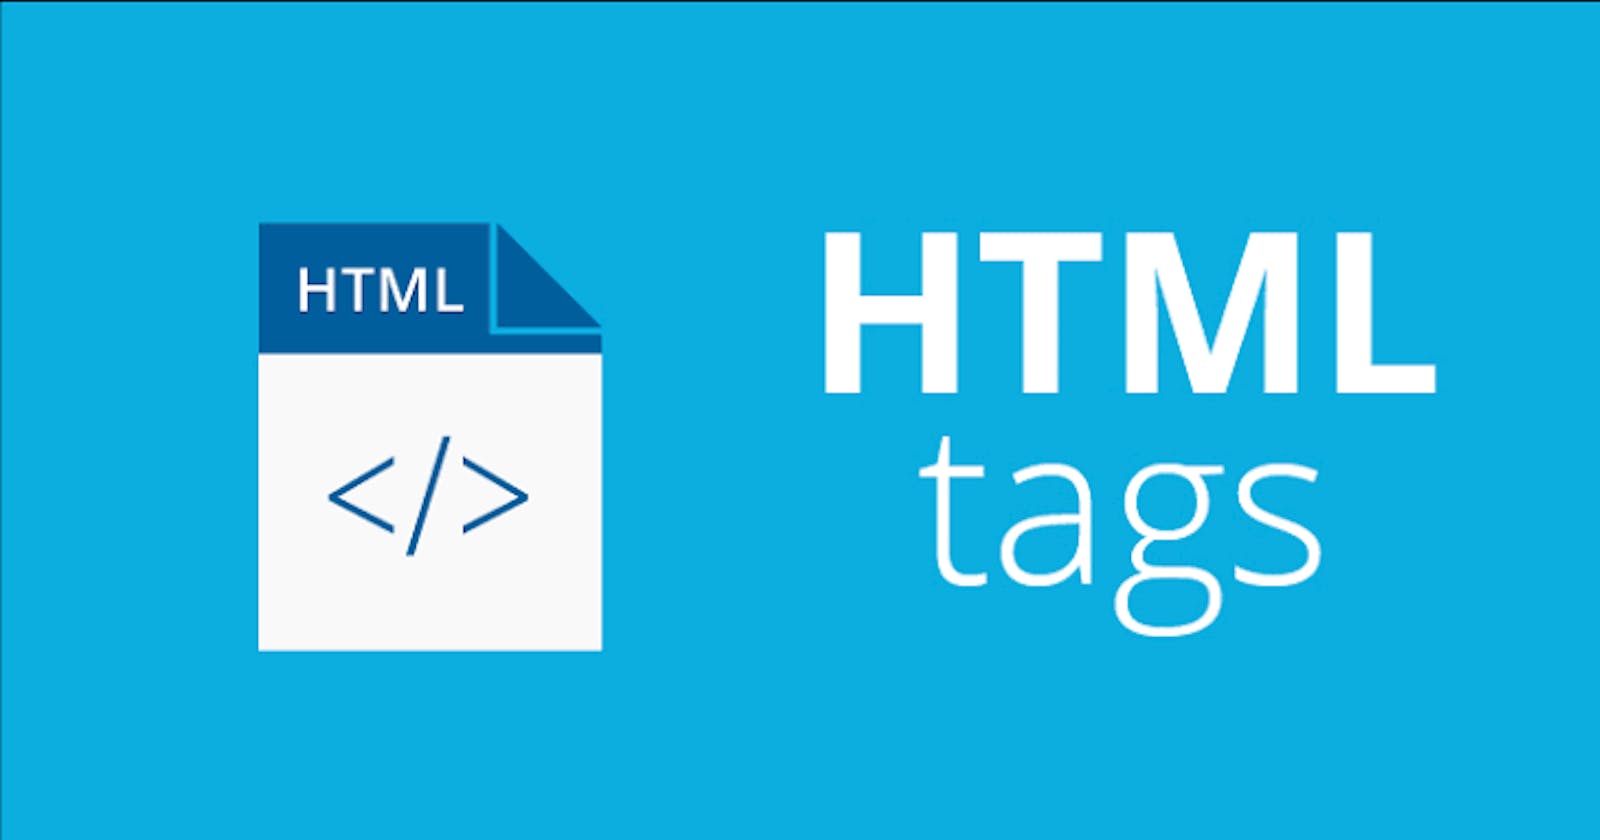 Getting started with HTML (part 2)